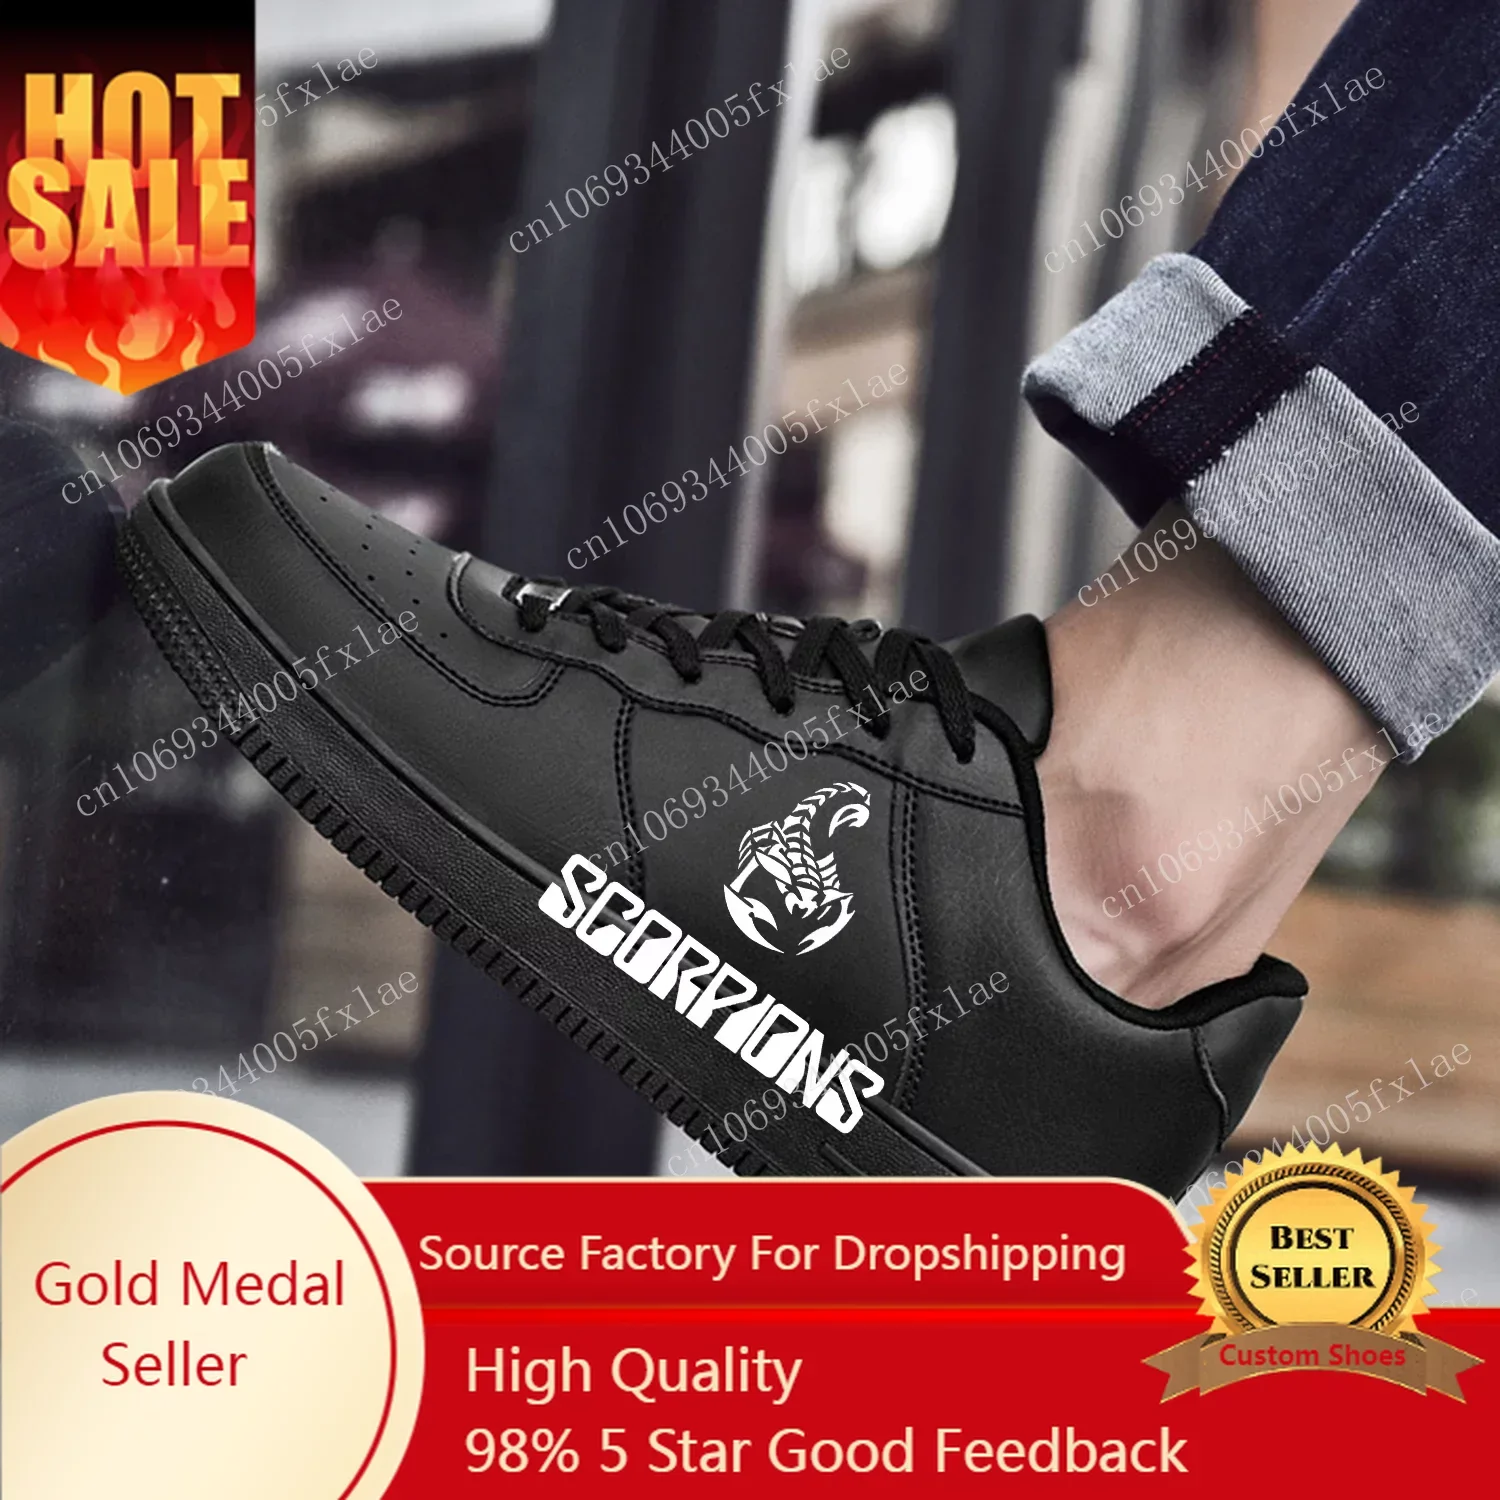 

Scorpions AF Basketball Mens Womens Sports Running High Quality Flats Force Sneakers Lace Up Mesh Customized Made Shoe Black